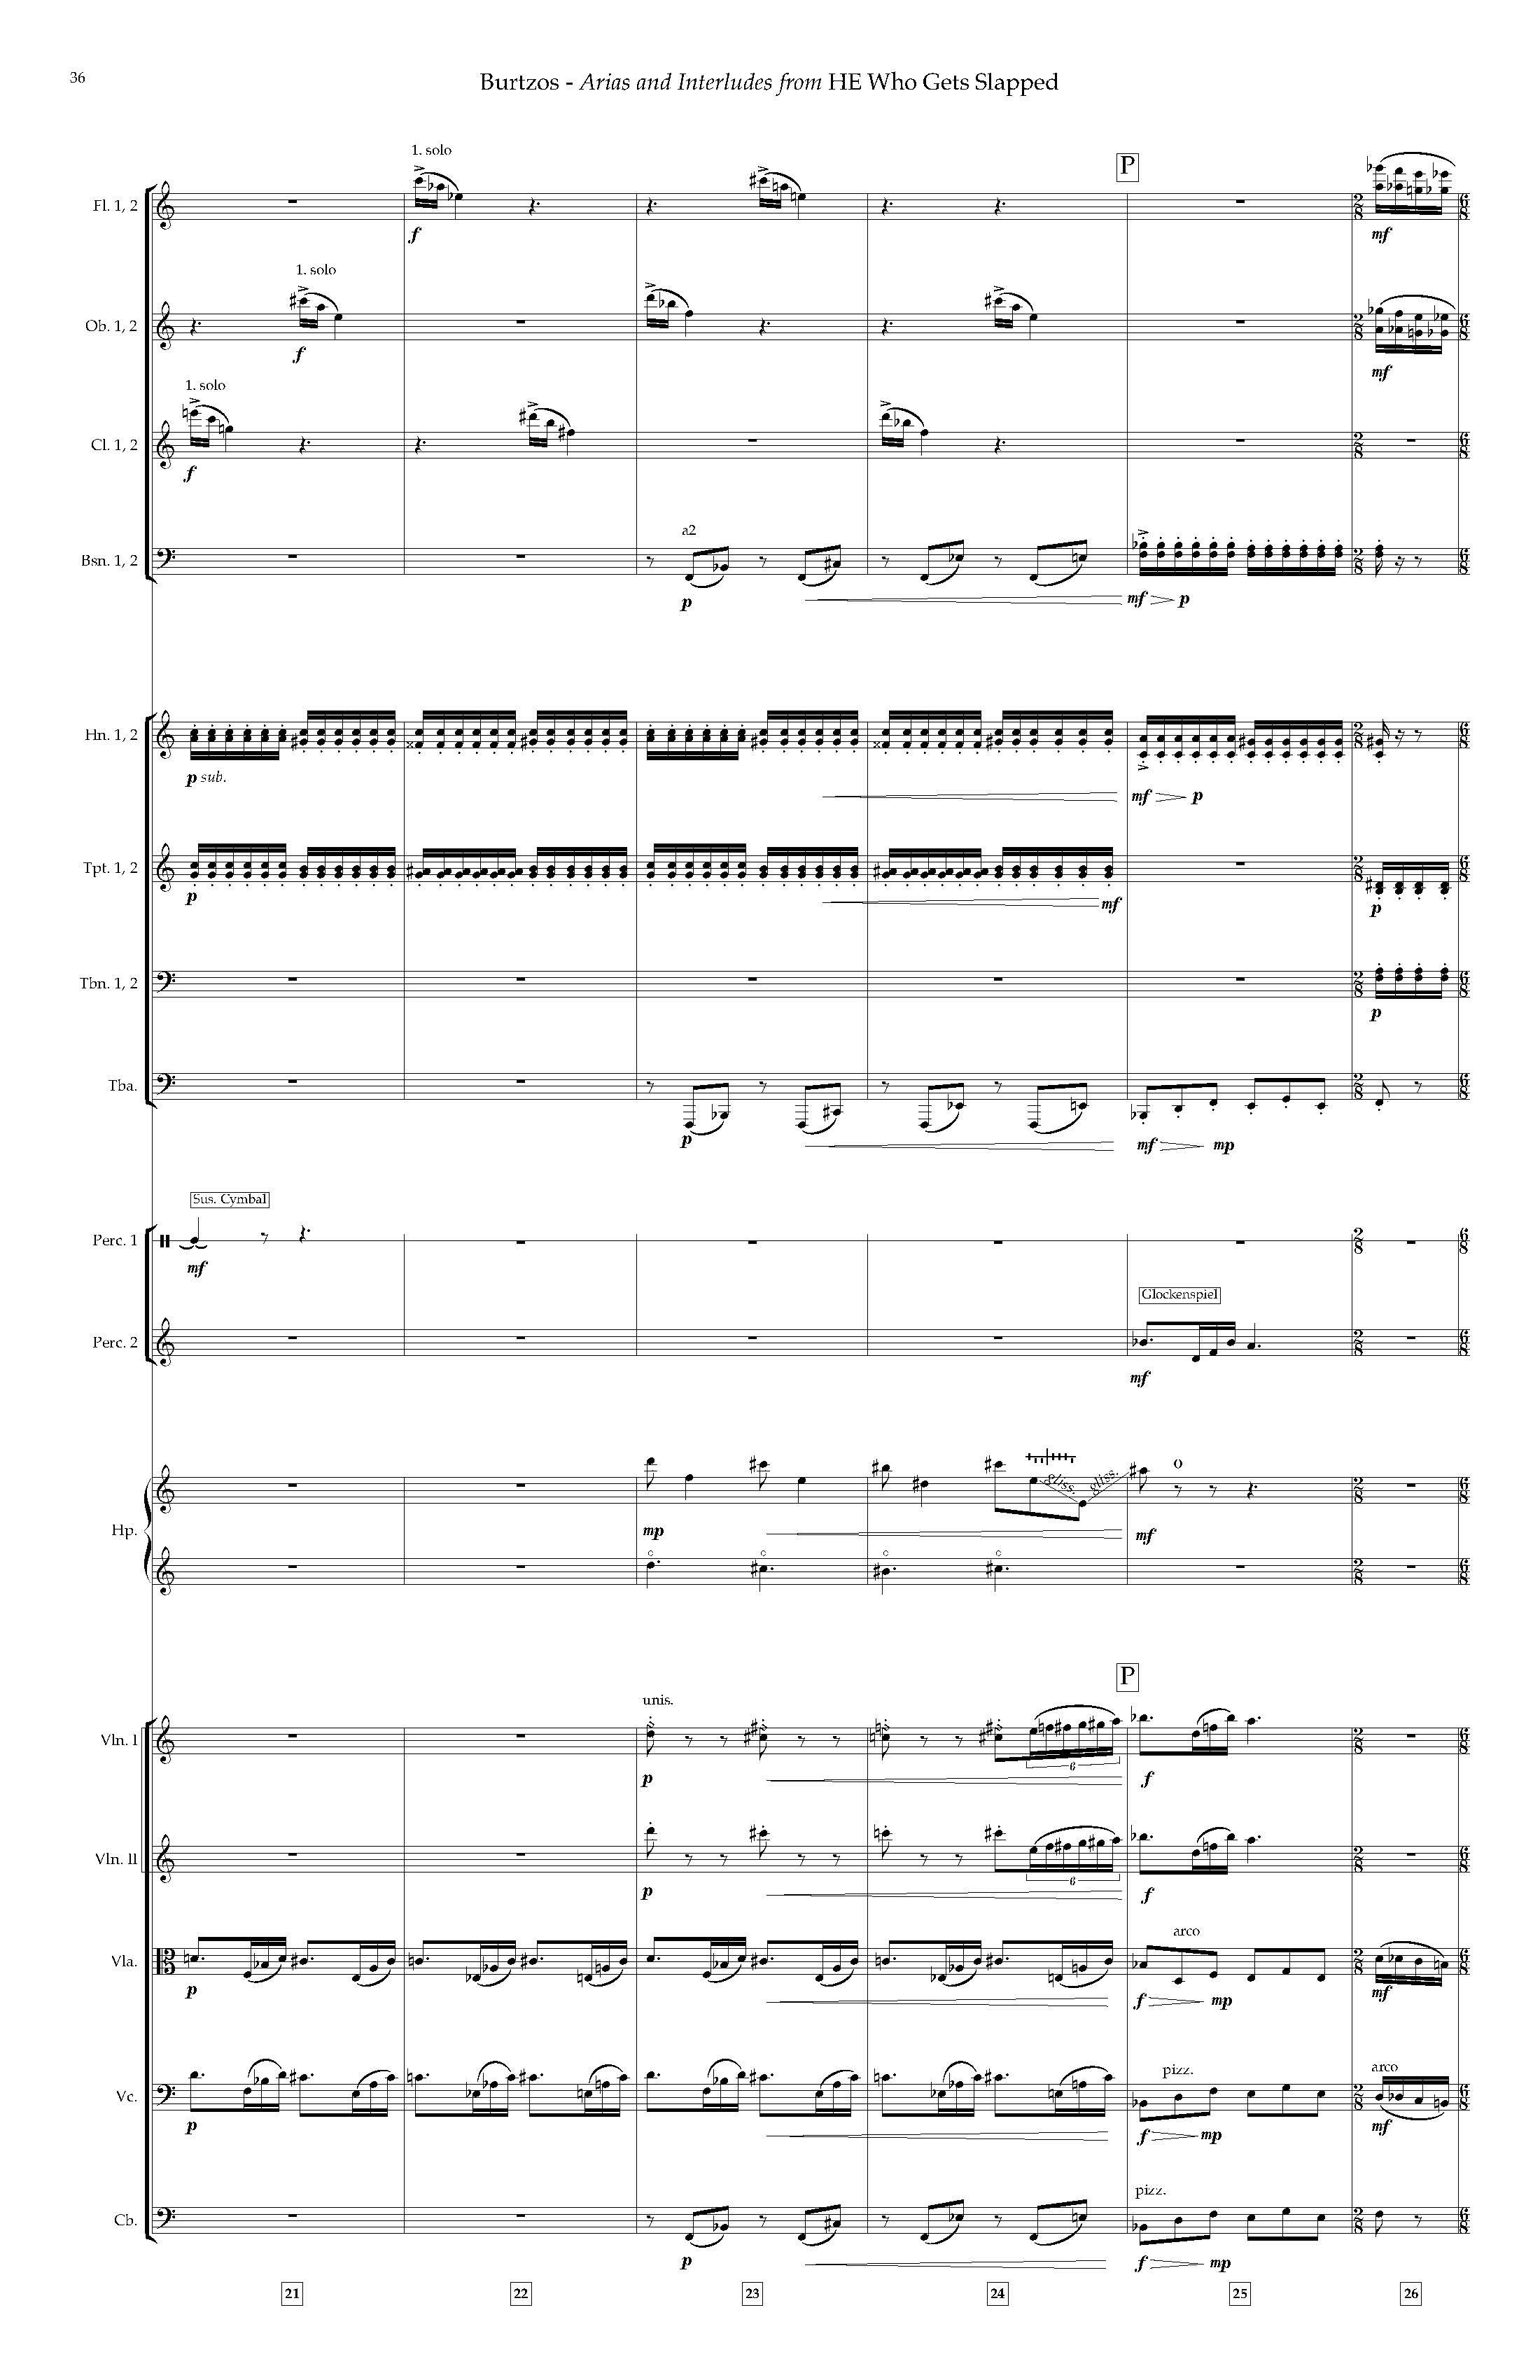 Arias and Interludes from HWGS - Complete Score_Page_42.jpg